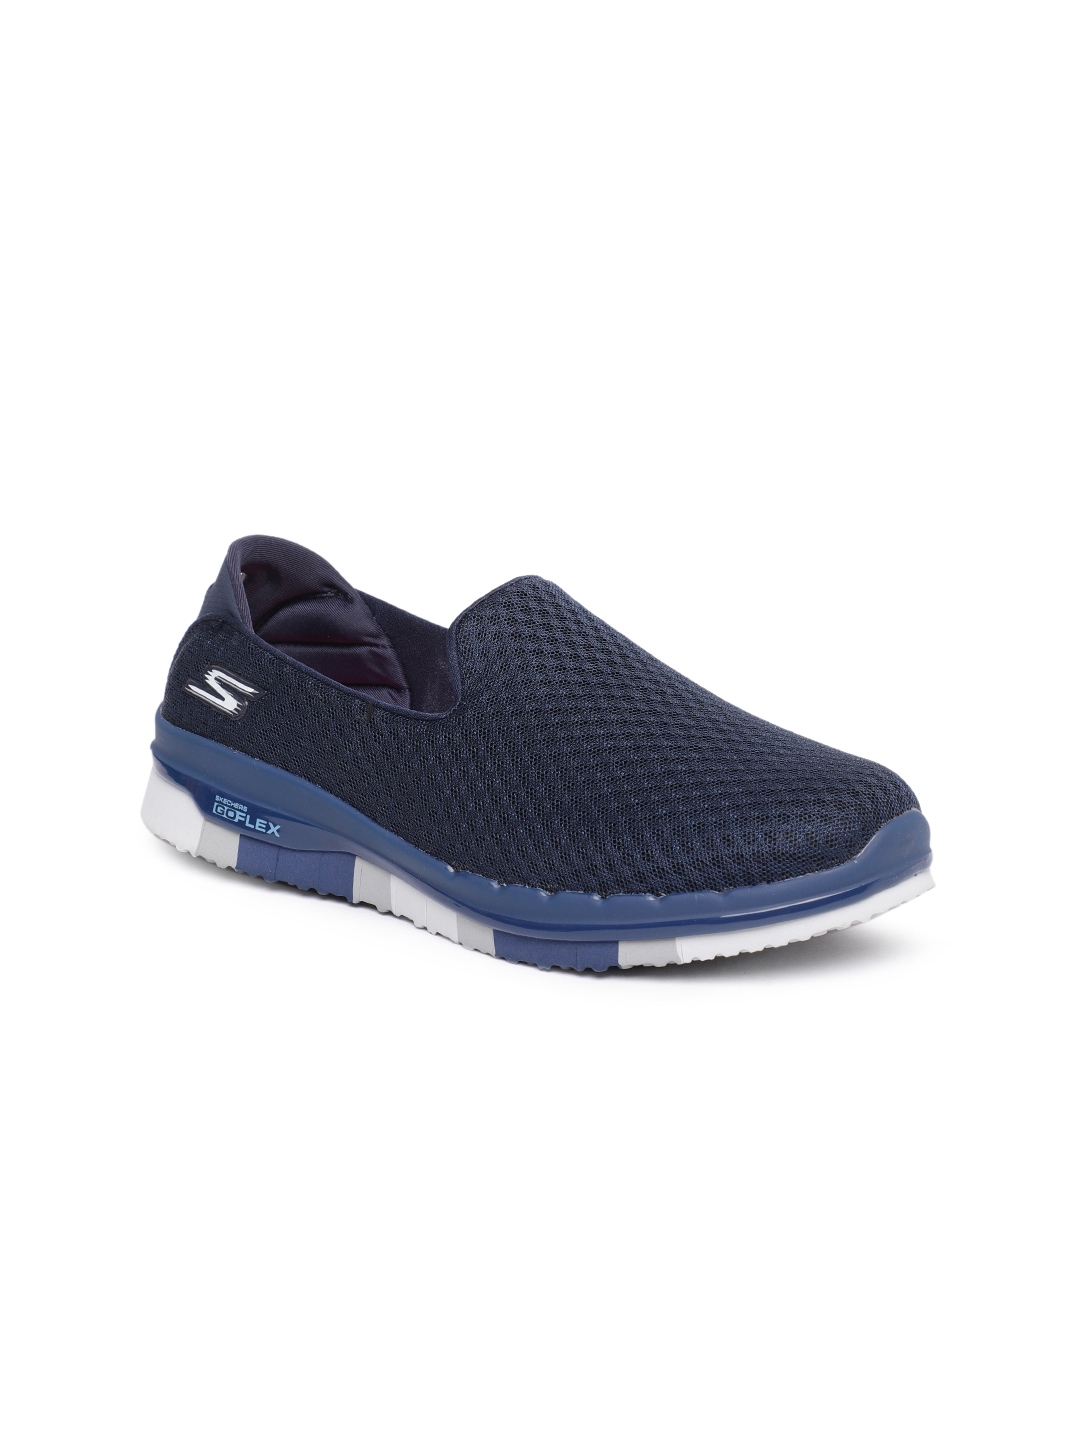 Ambient versnelling manager skechers go flex blue for Sale,Up To OFF 68%